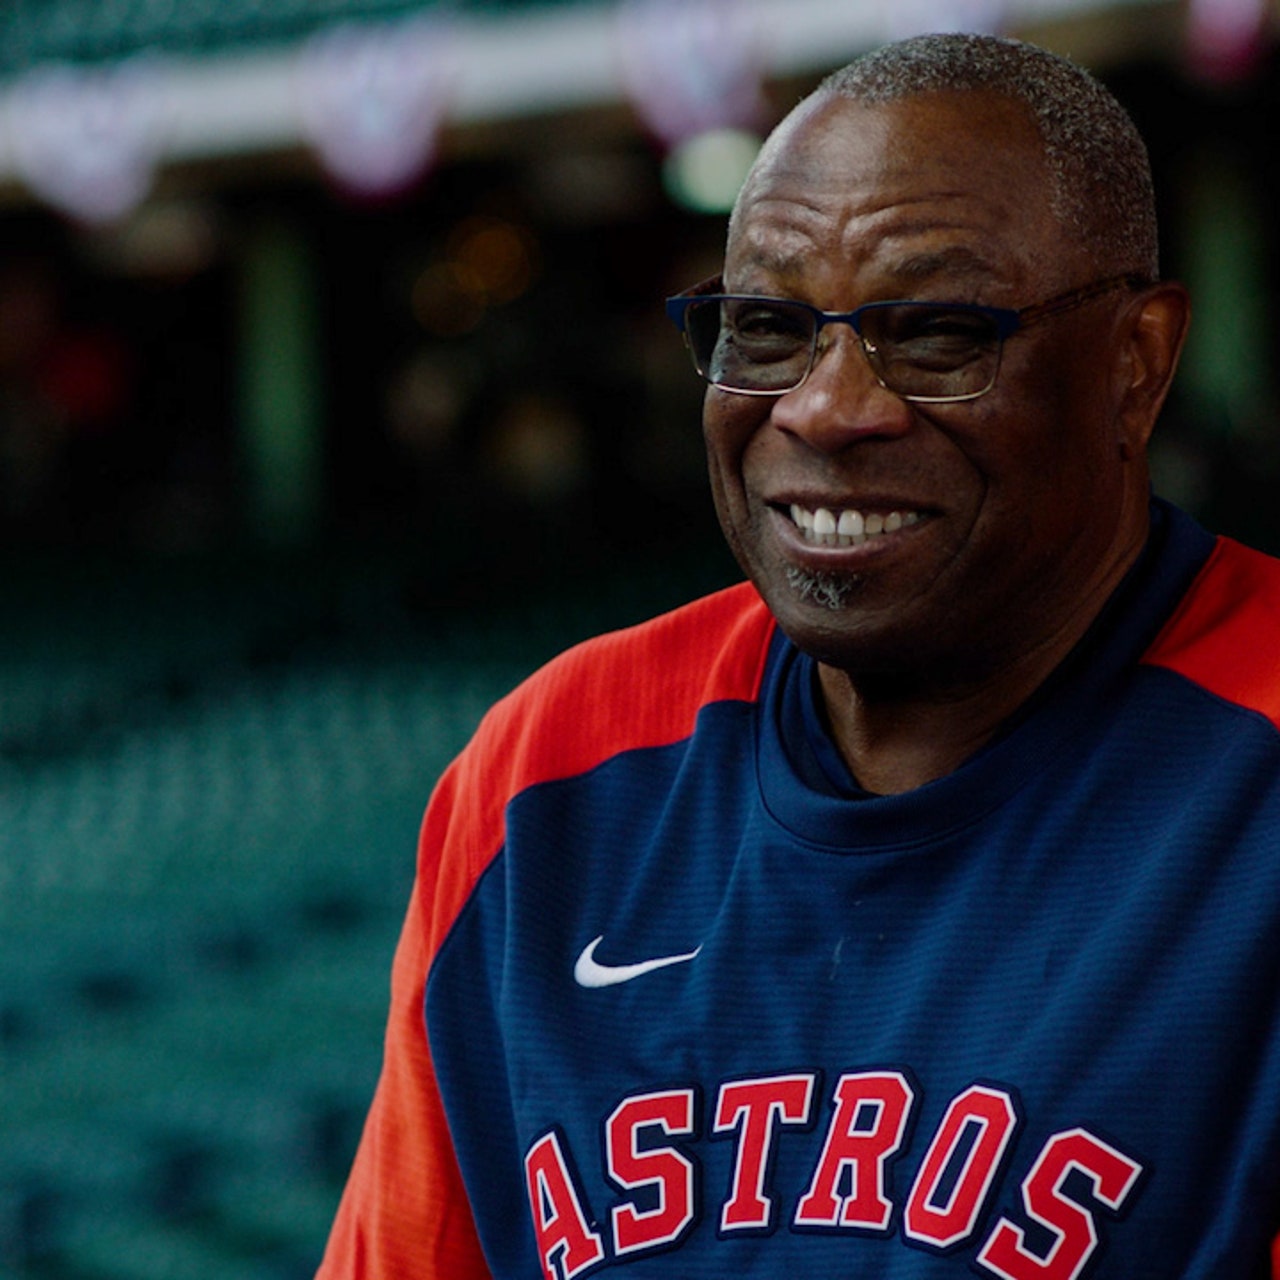 Astros manager Dusty Baker sits down with Tom Rinaldi for an exclusive  interview on his remarkable MLB career